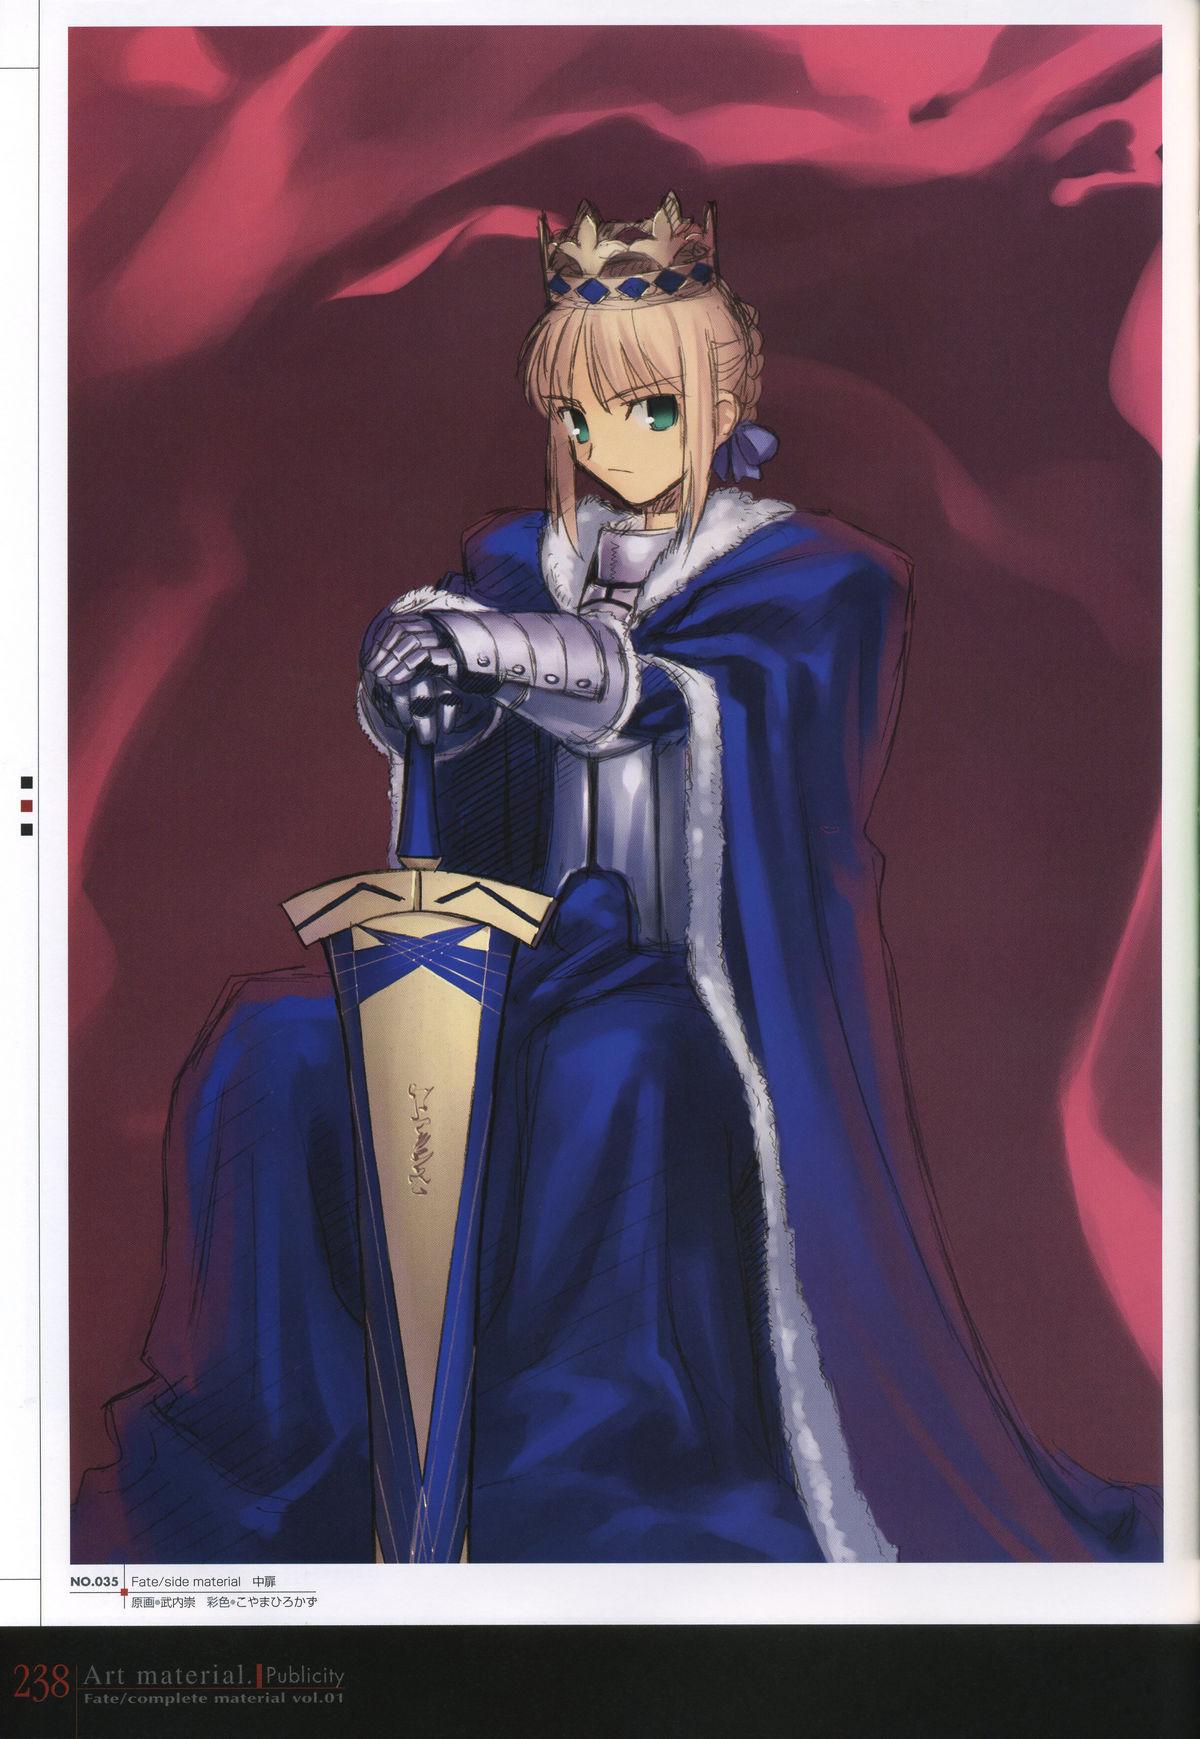 Fate/complete material I - Art material. 242